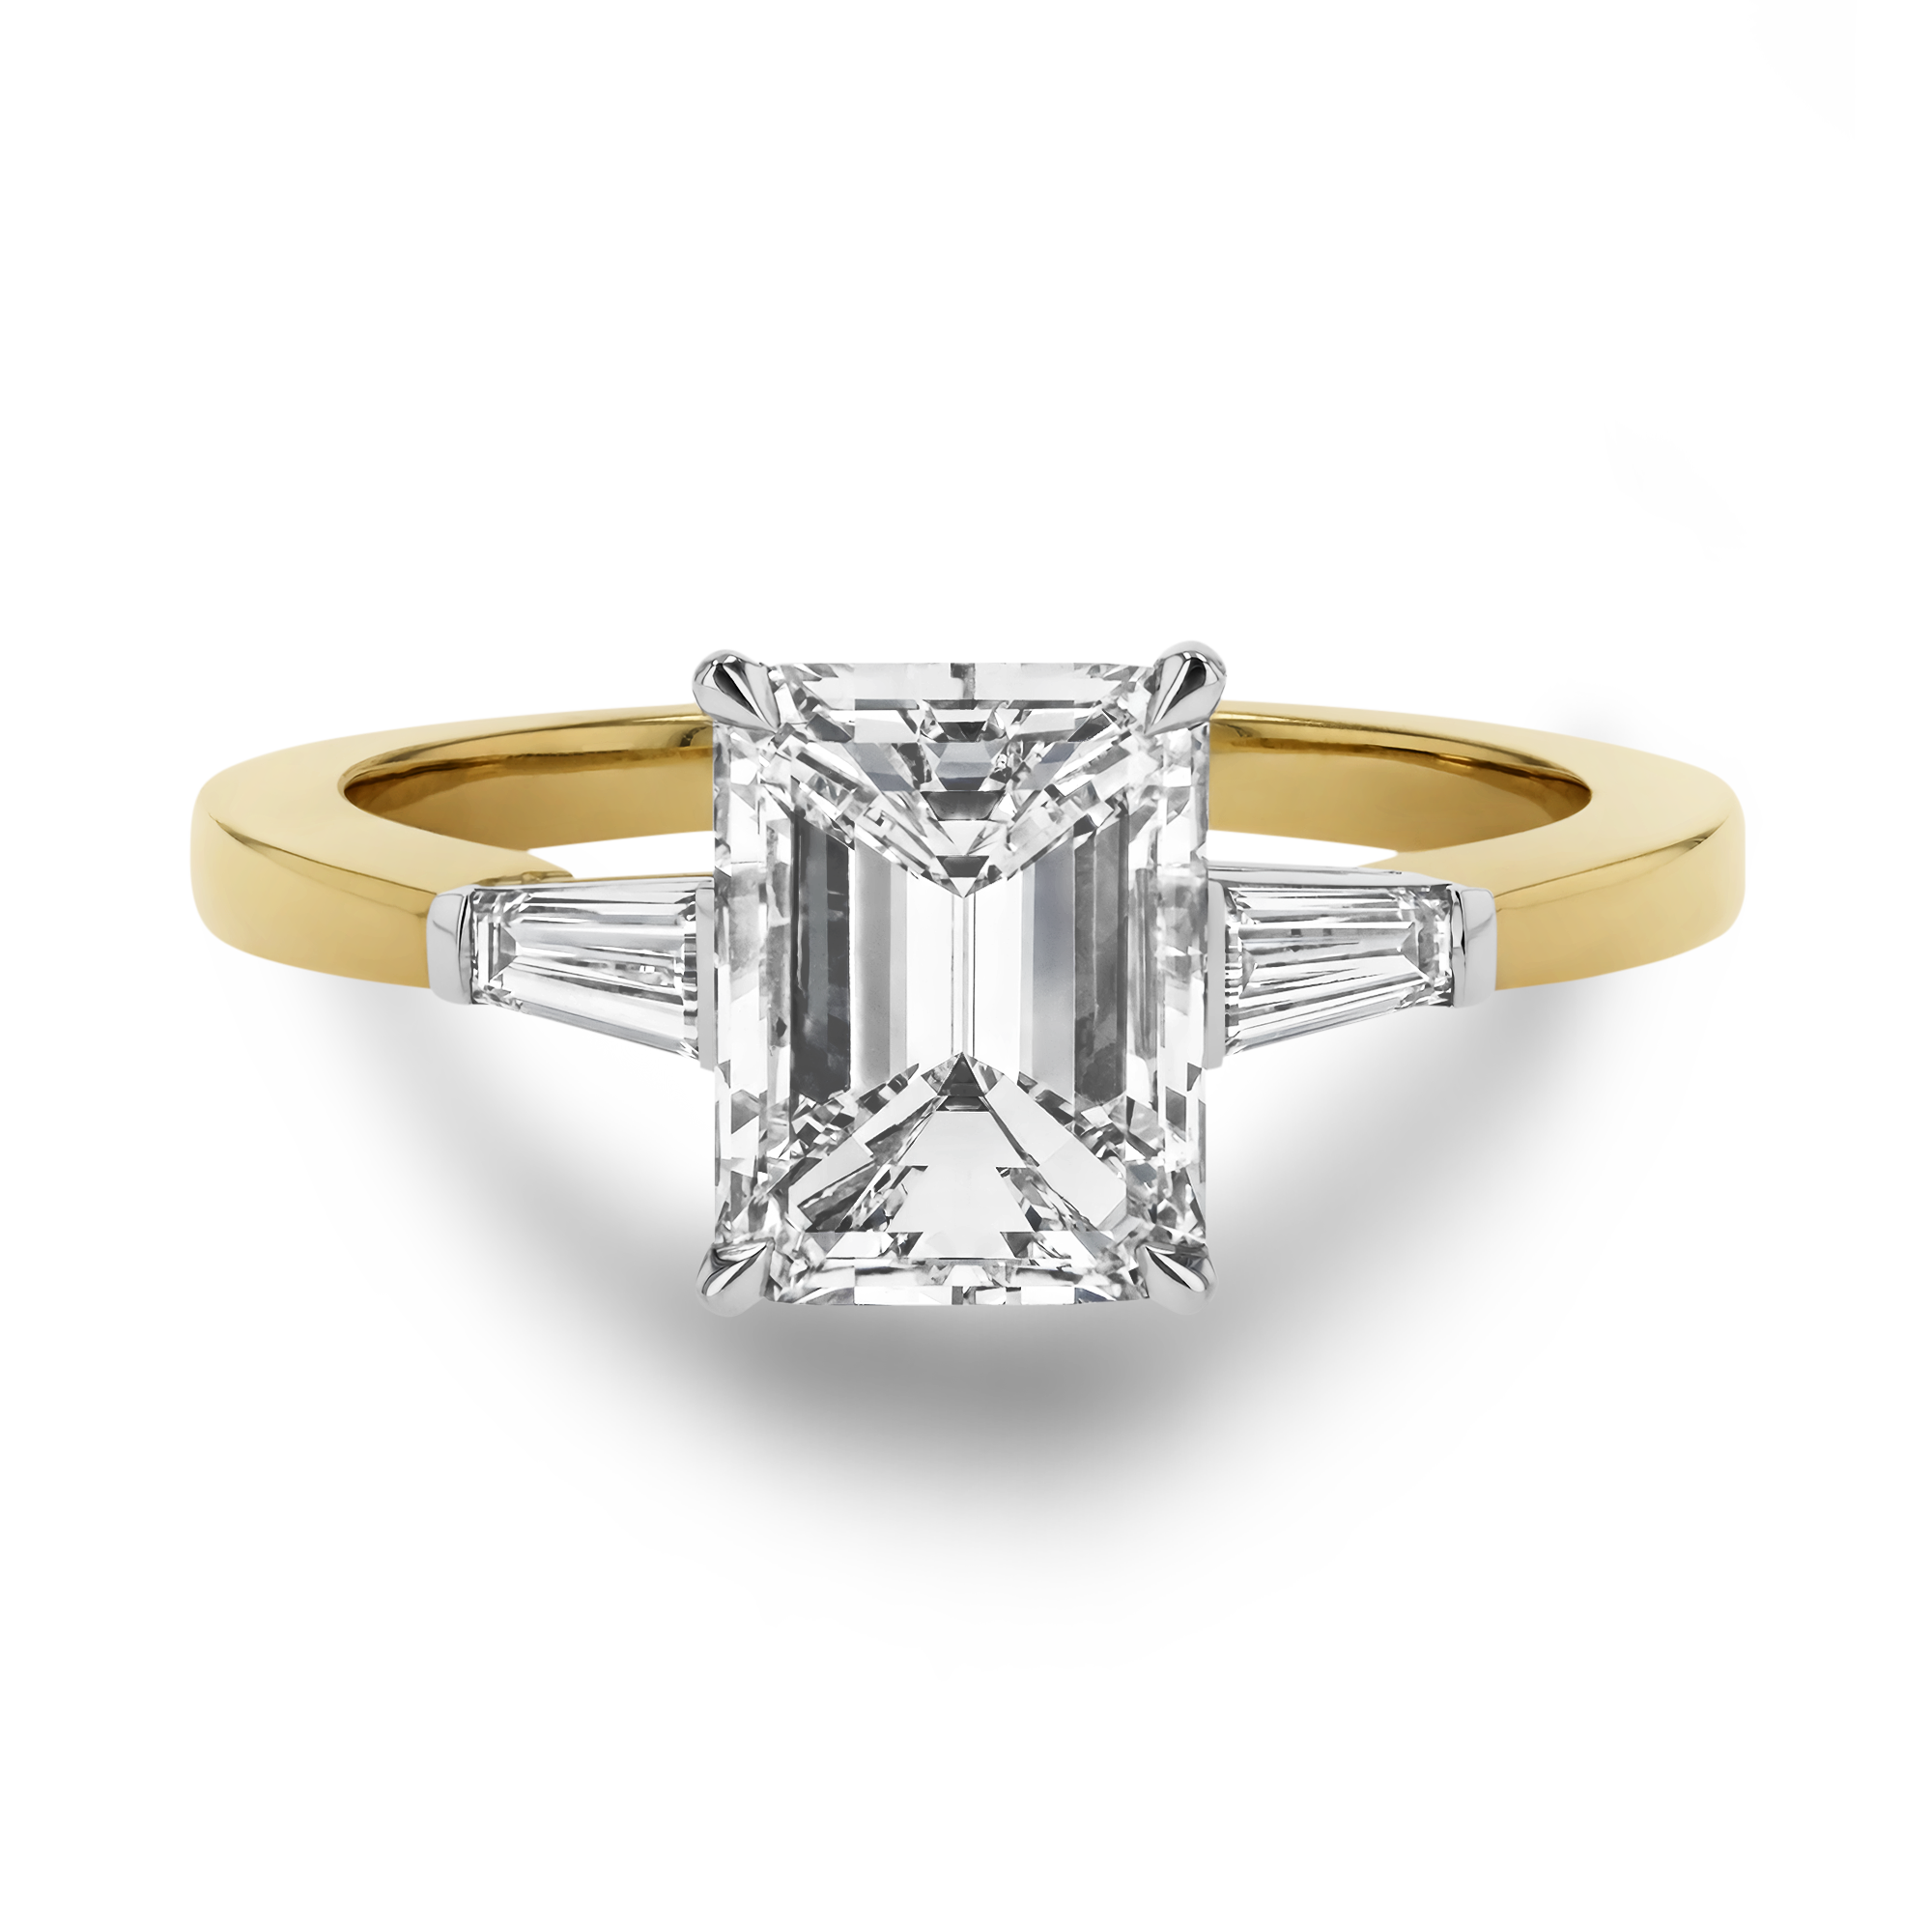 Regency 2.01ct Diamond Solitaire Ring Emerald Cut, Claw Set_2